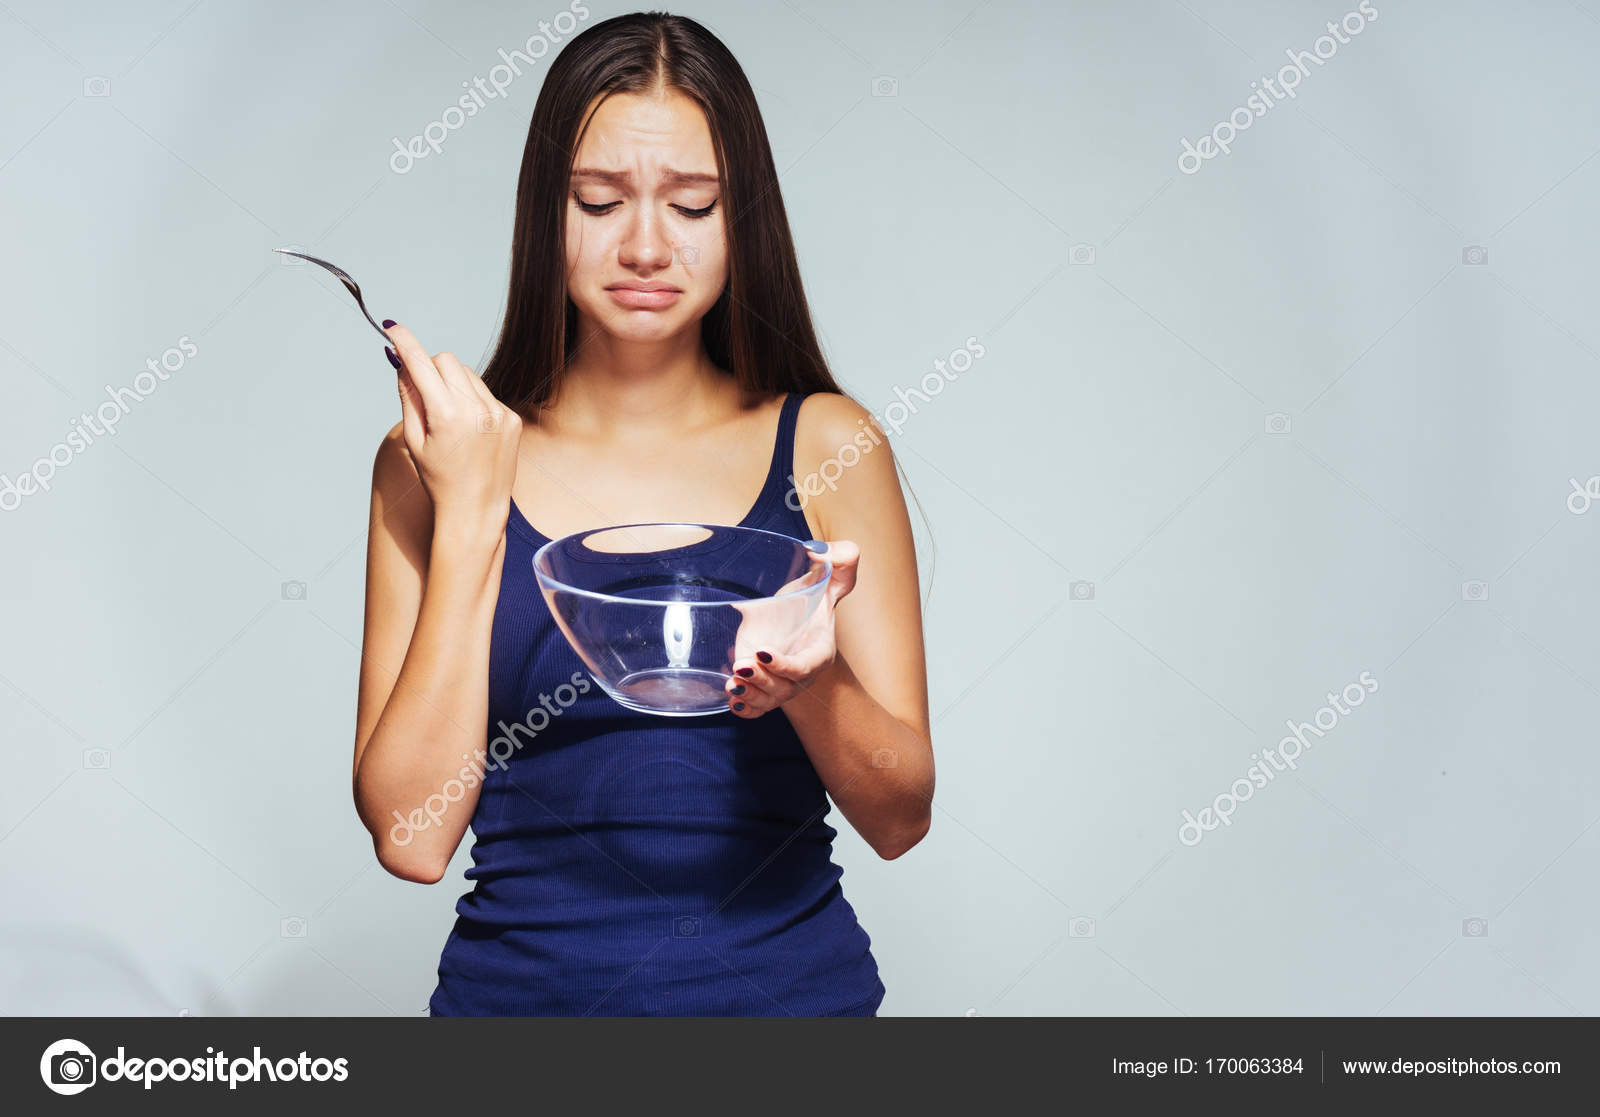 a girl with an empty bowl